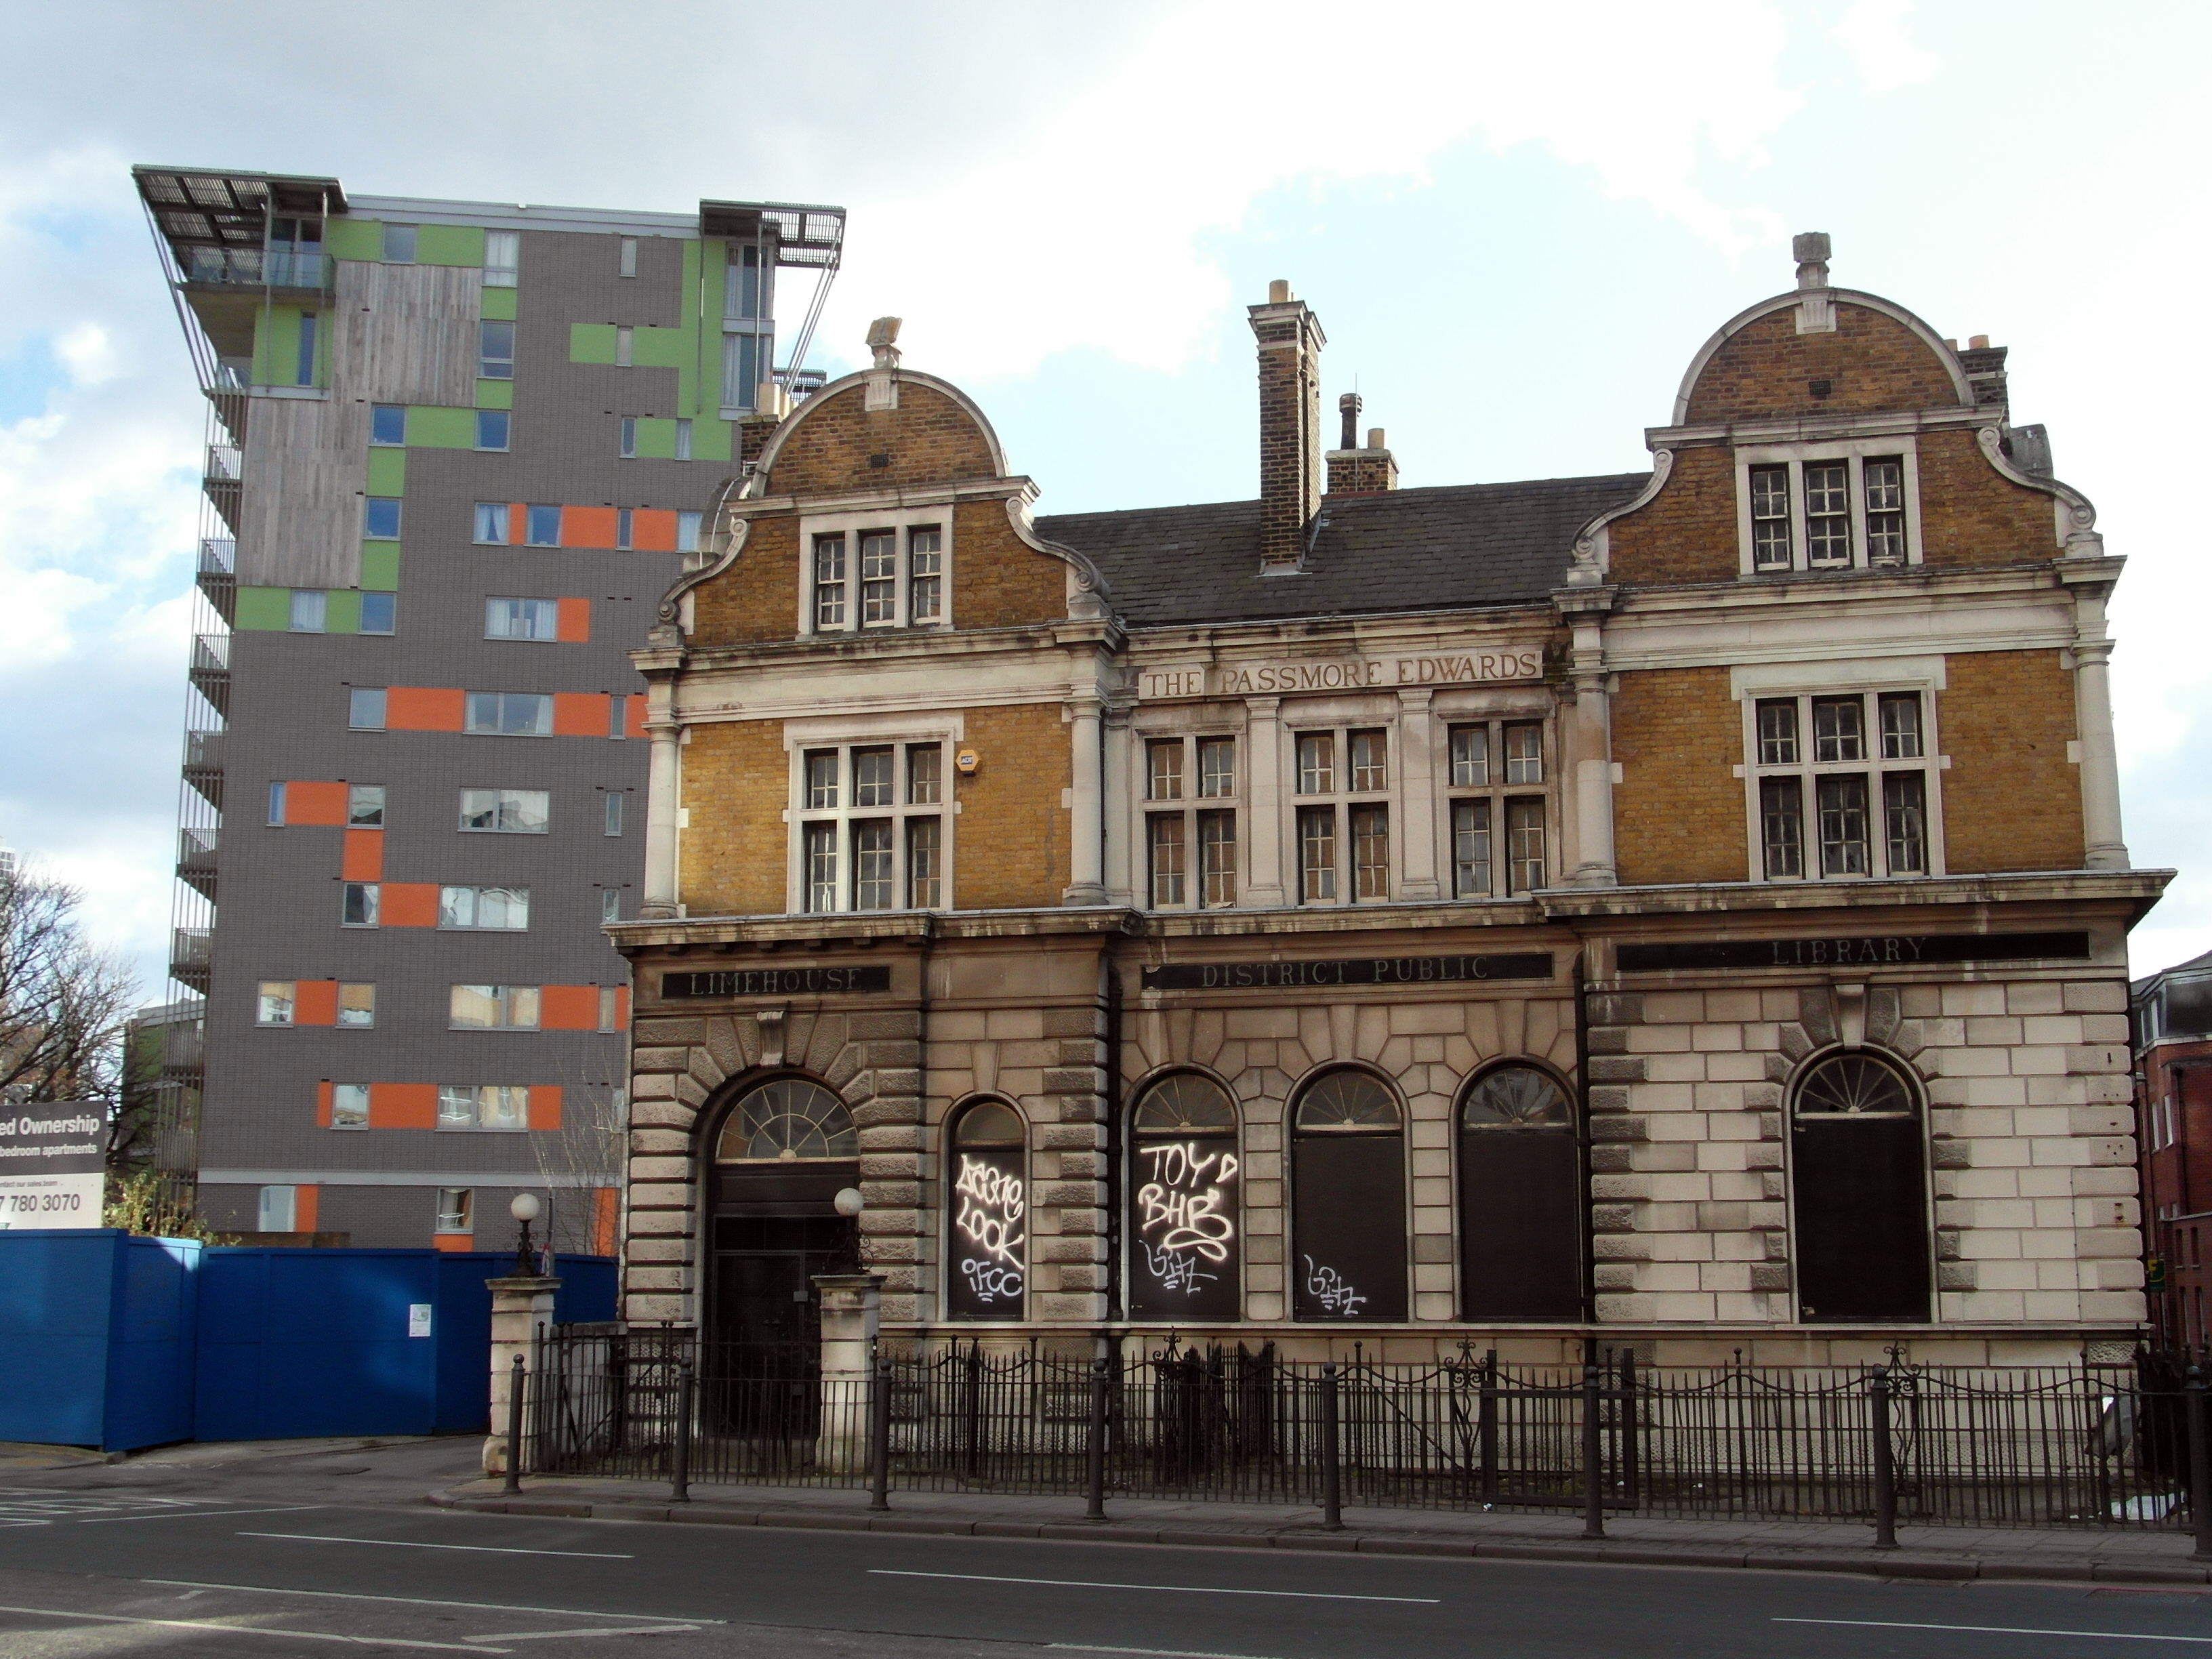 Limehouse Library